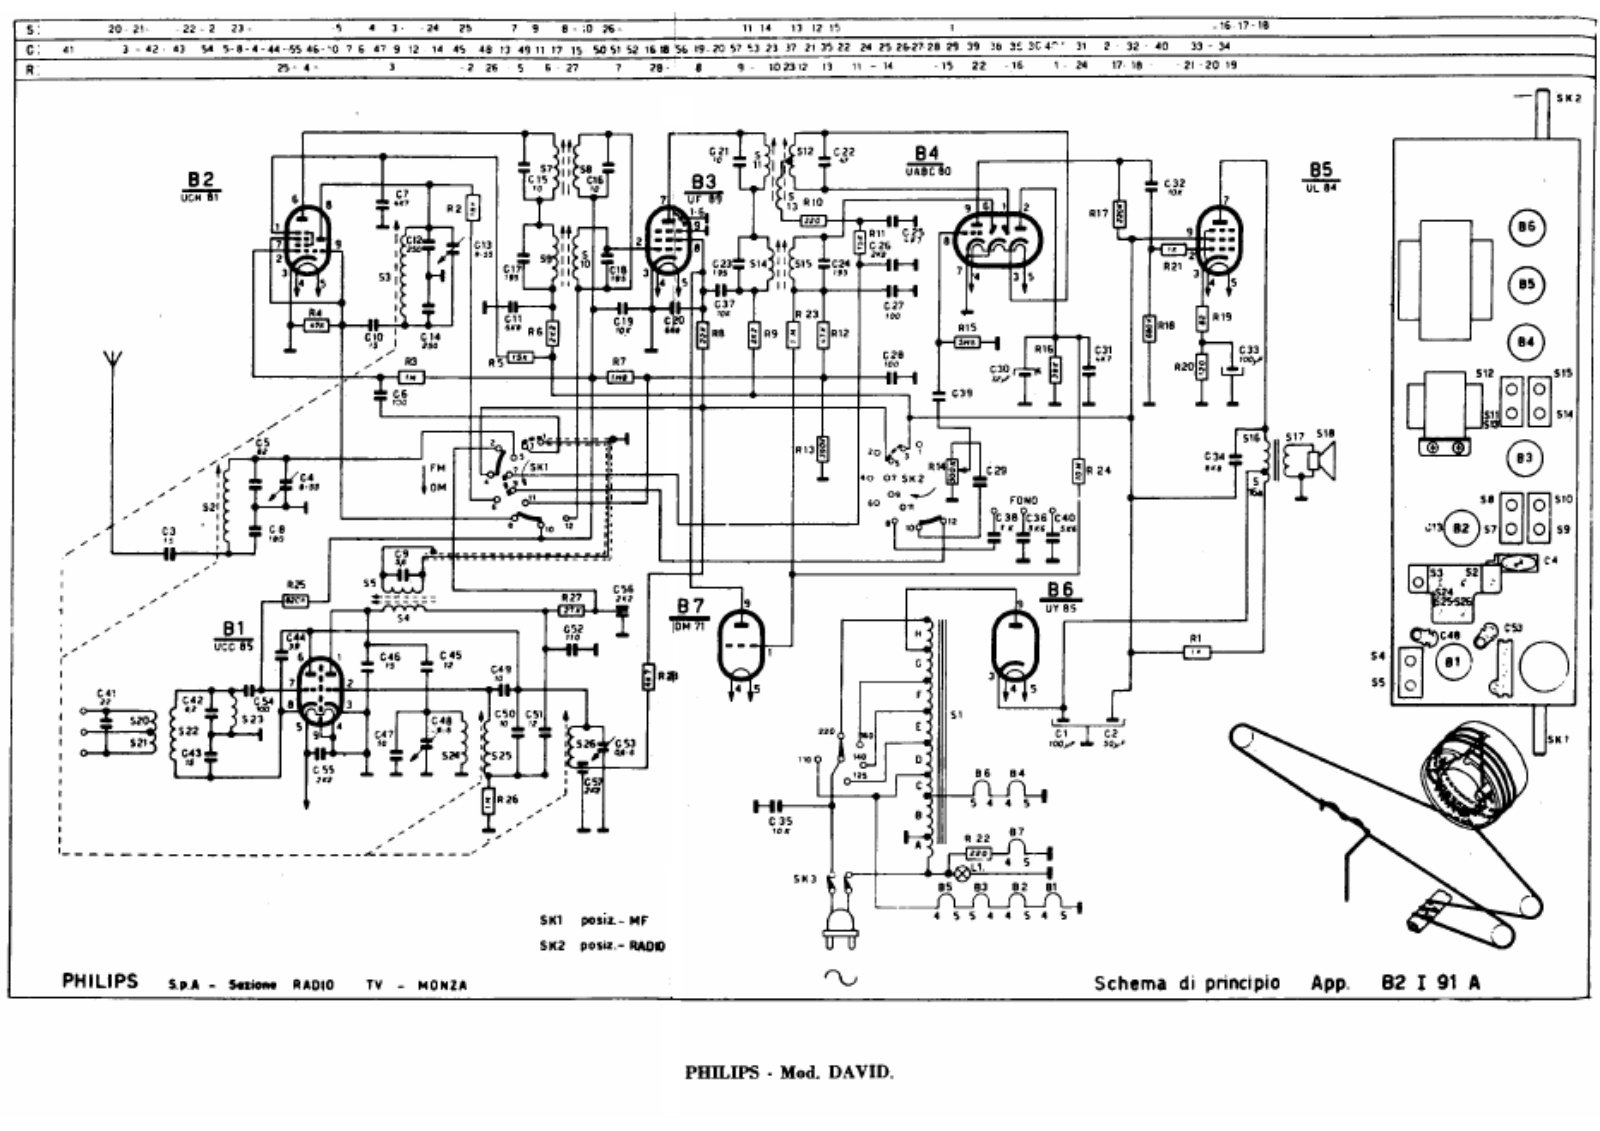 Philips b2 i 91 a schematic